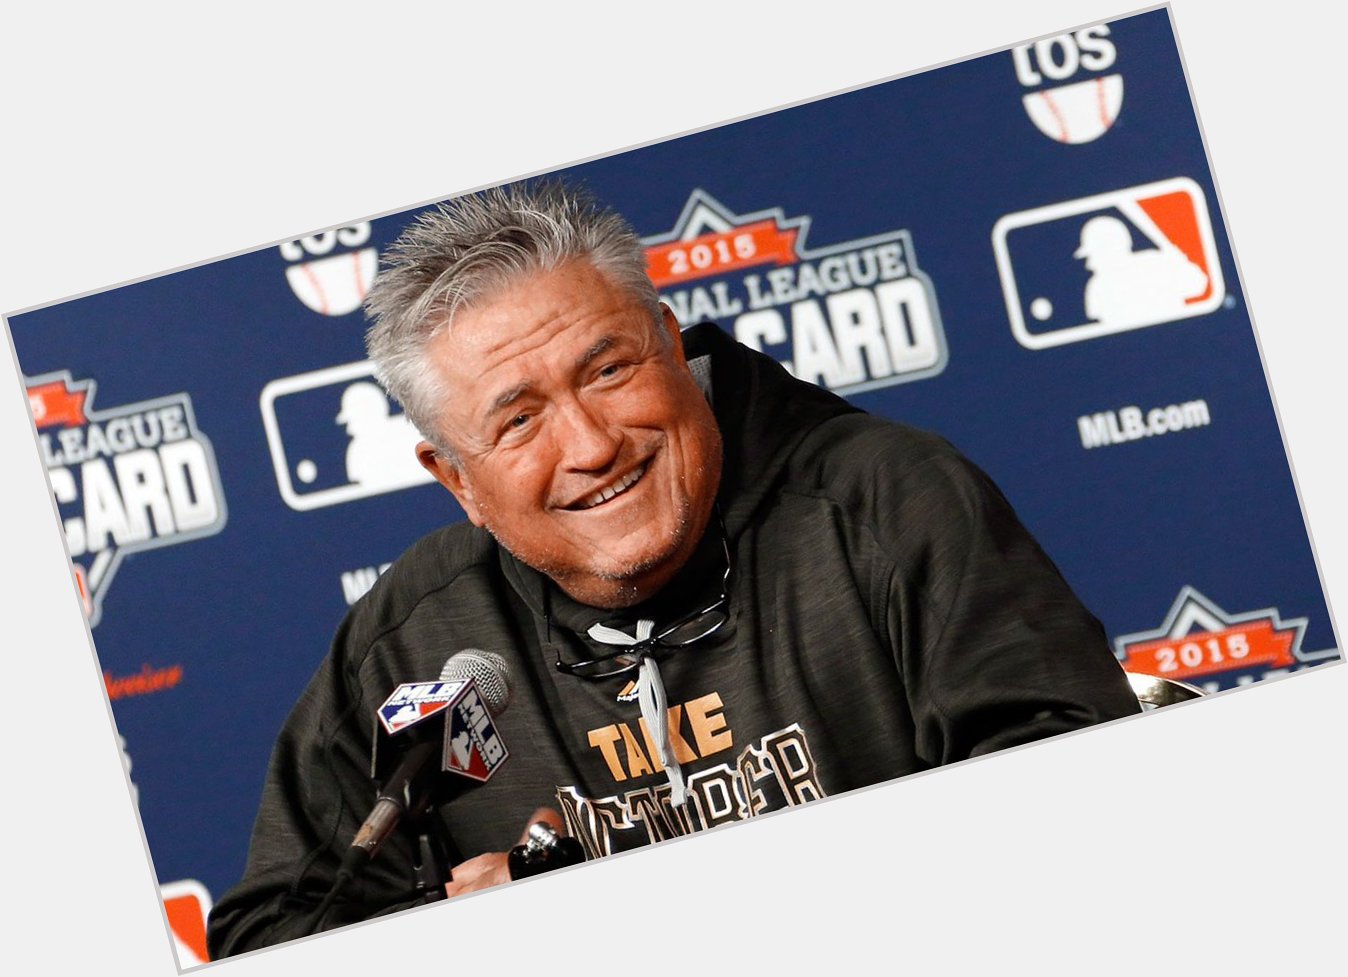 Happy 60th birthday to manager and one of the nicest guys around, Clint Hurdle! Have an awesome day, Clint! 